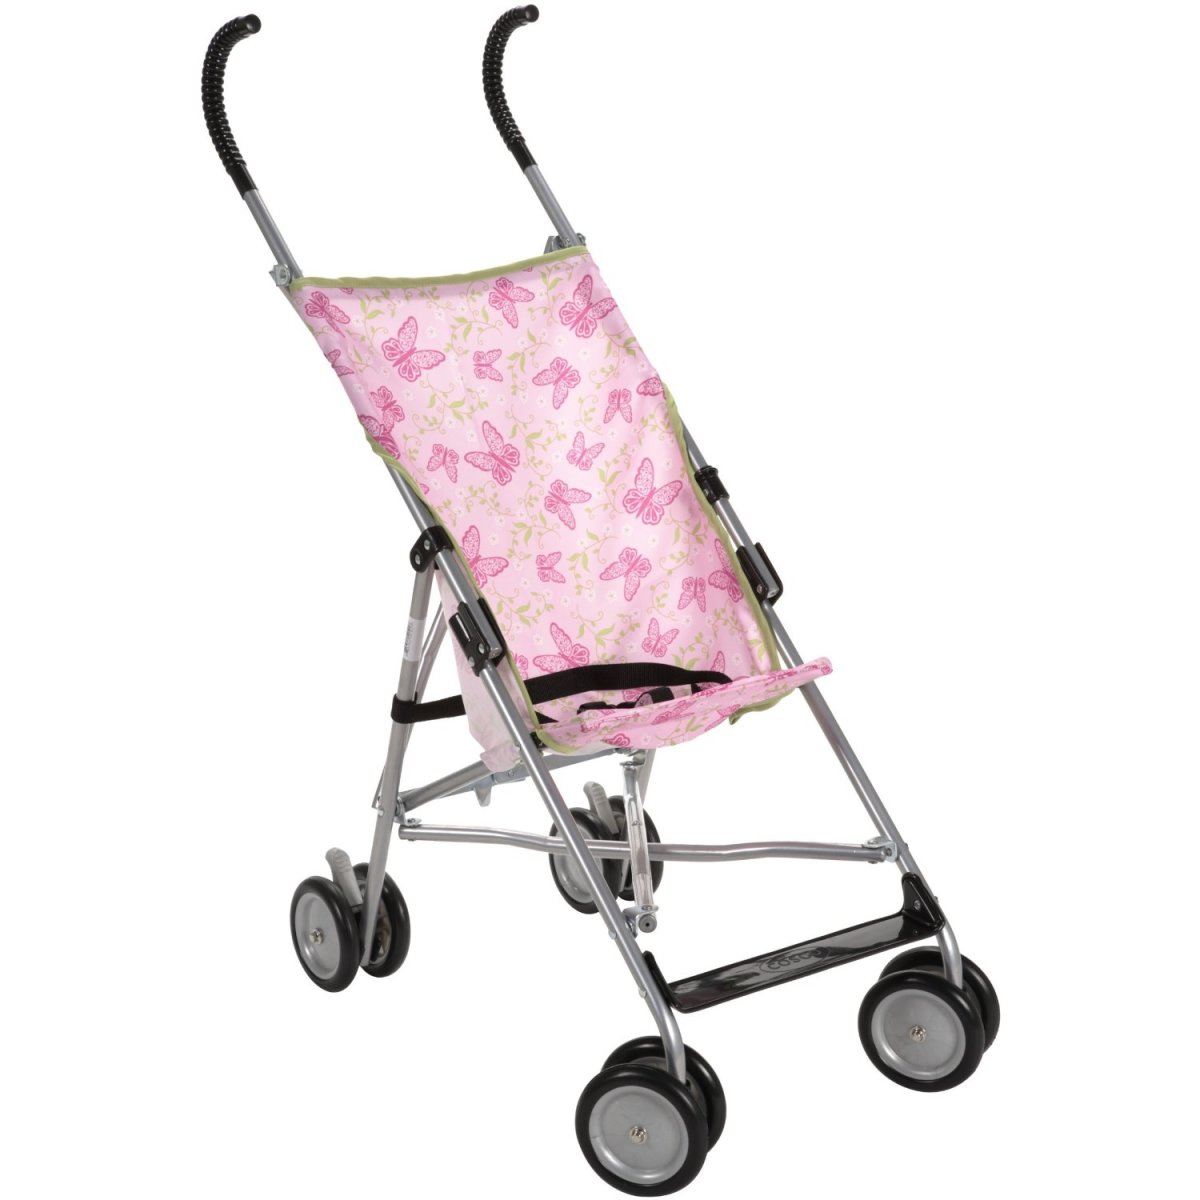 Cosco Stroller And Umbrella Stroller, The Best Lightweight Baby Strollers  hubpages